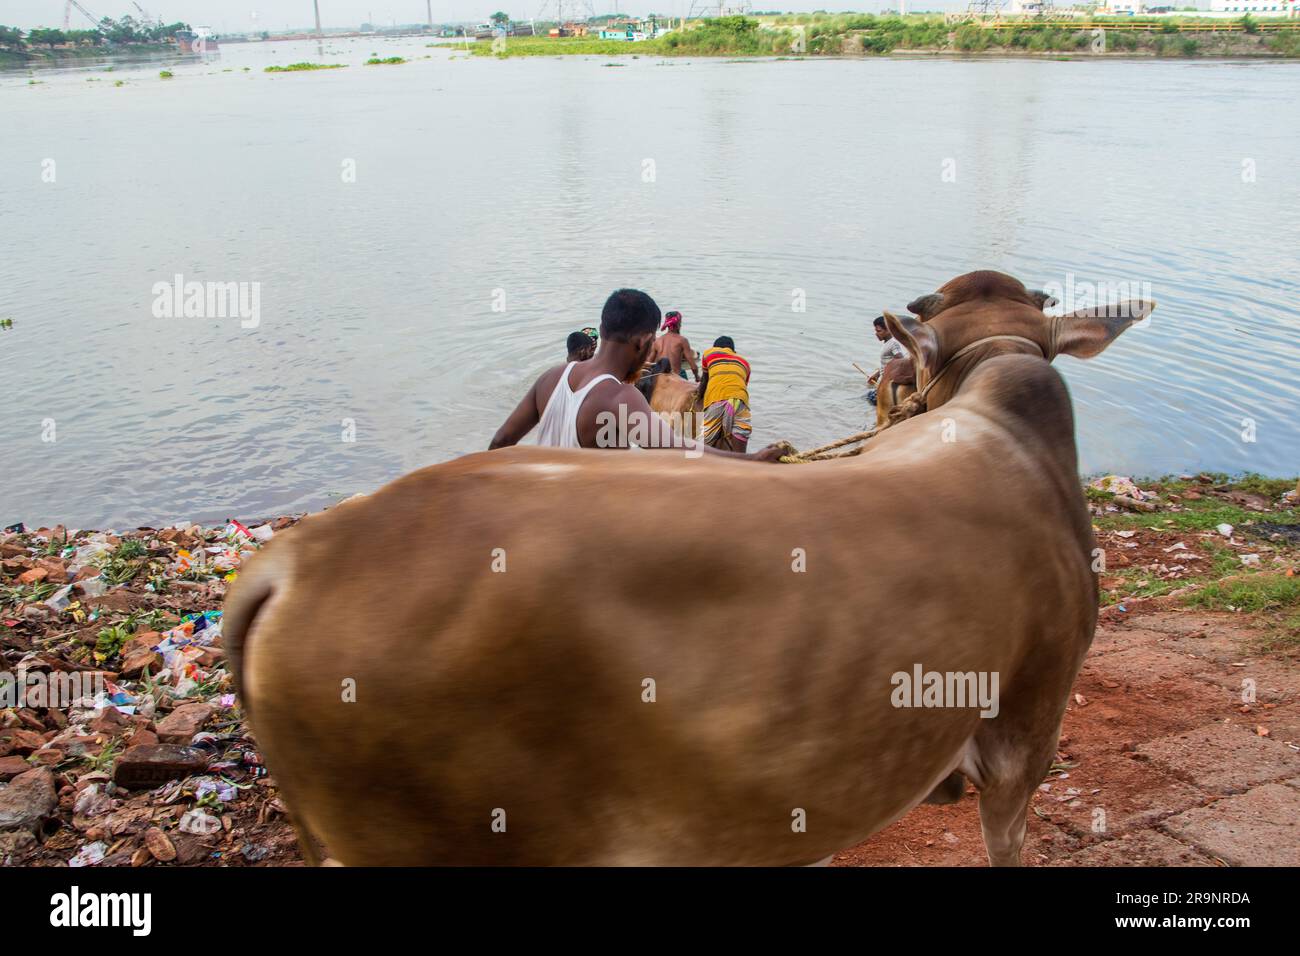 Eid ul adha activity. Farmers are bathing the cow in the river. This photo was captured from Dhaka, Bangladesh on July 25, 2023 Stock Photo